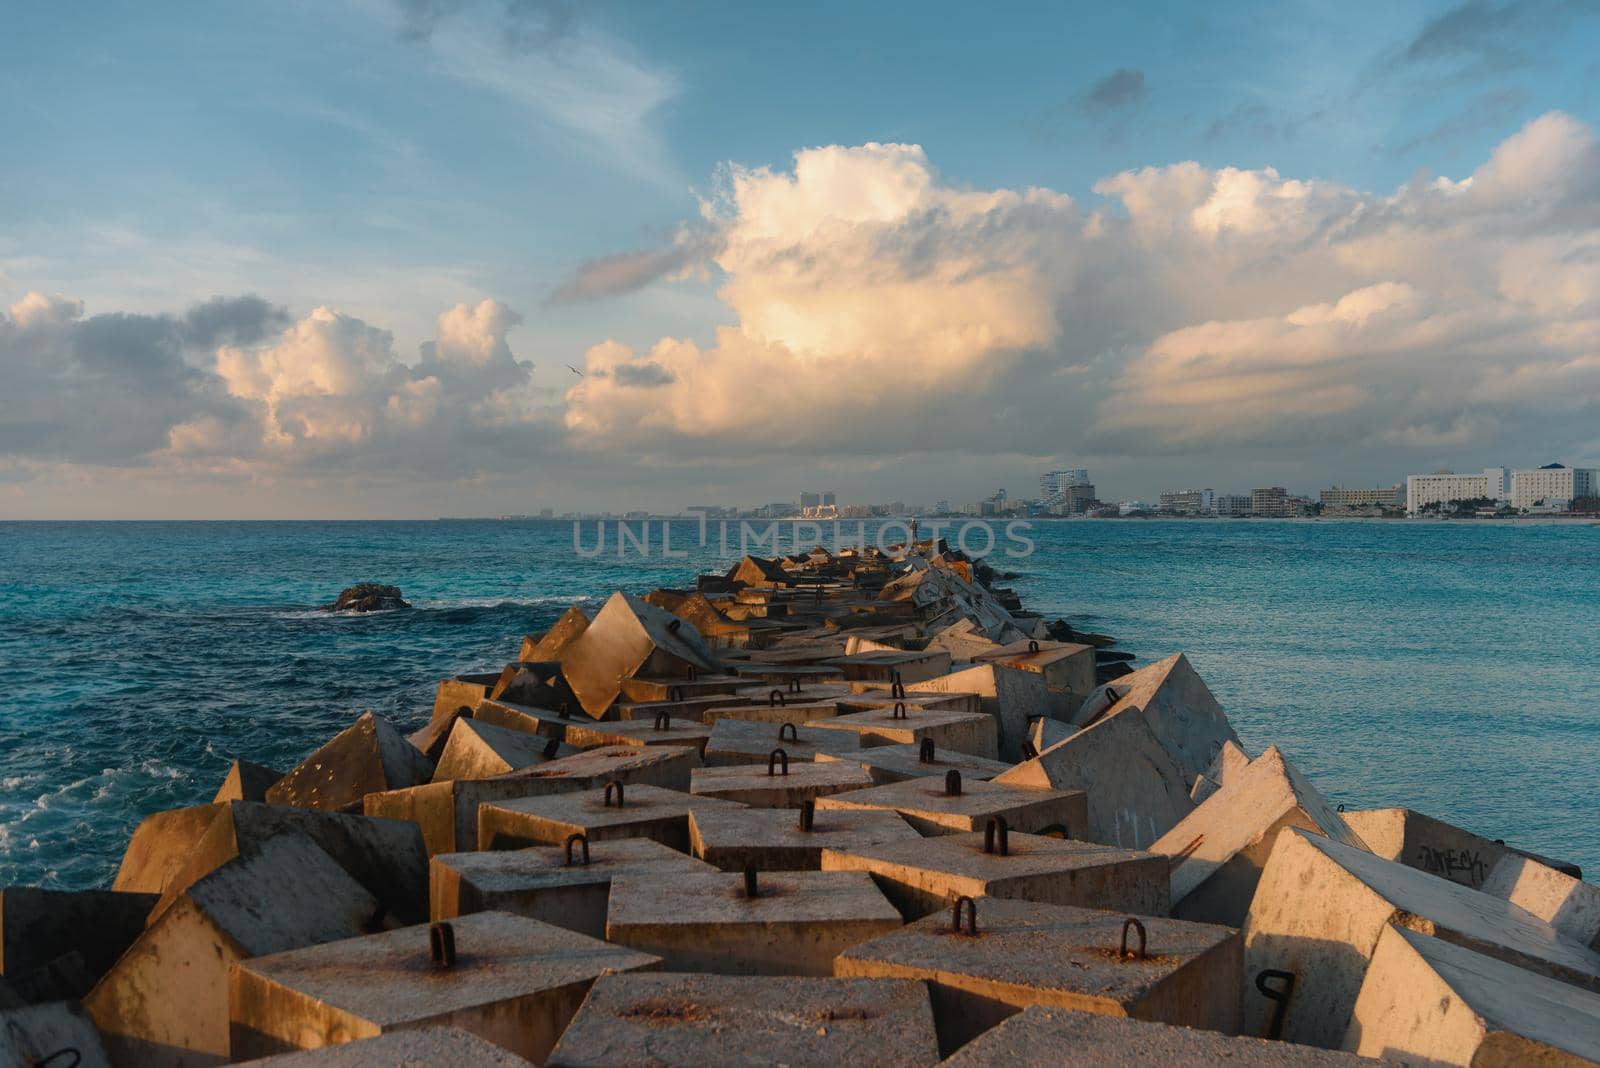 Breakwater made of concrete slabs on the Caribbean Sea. Cancun.